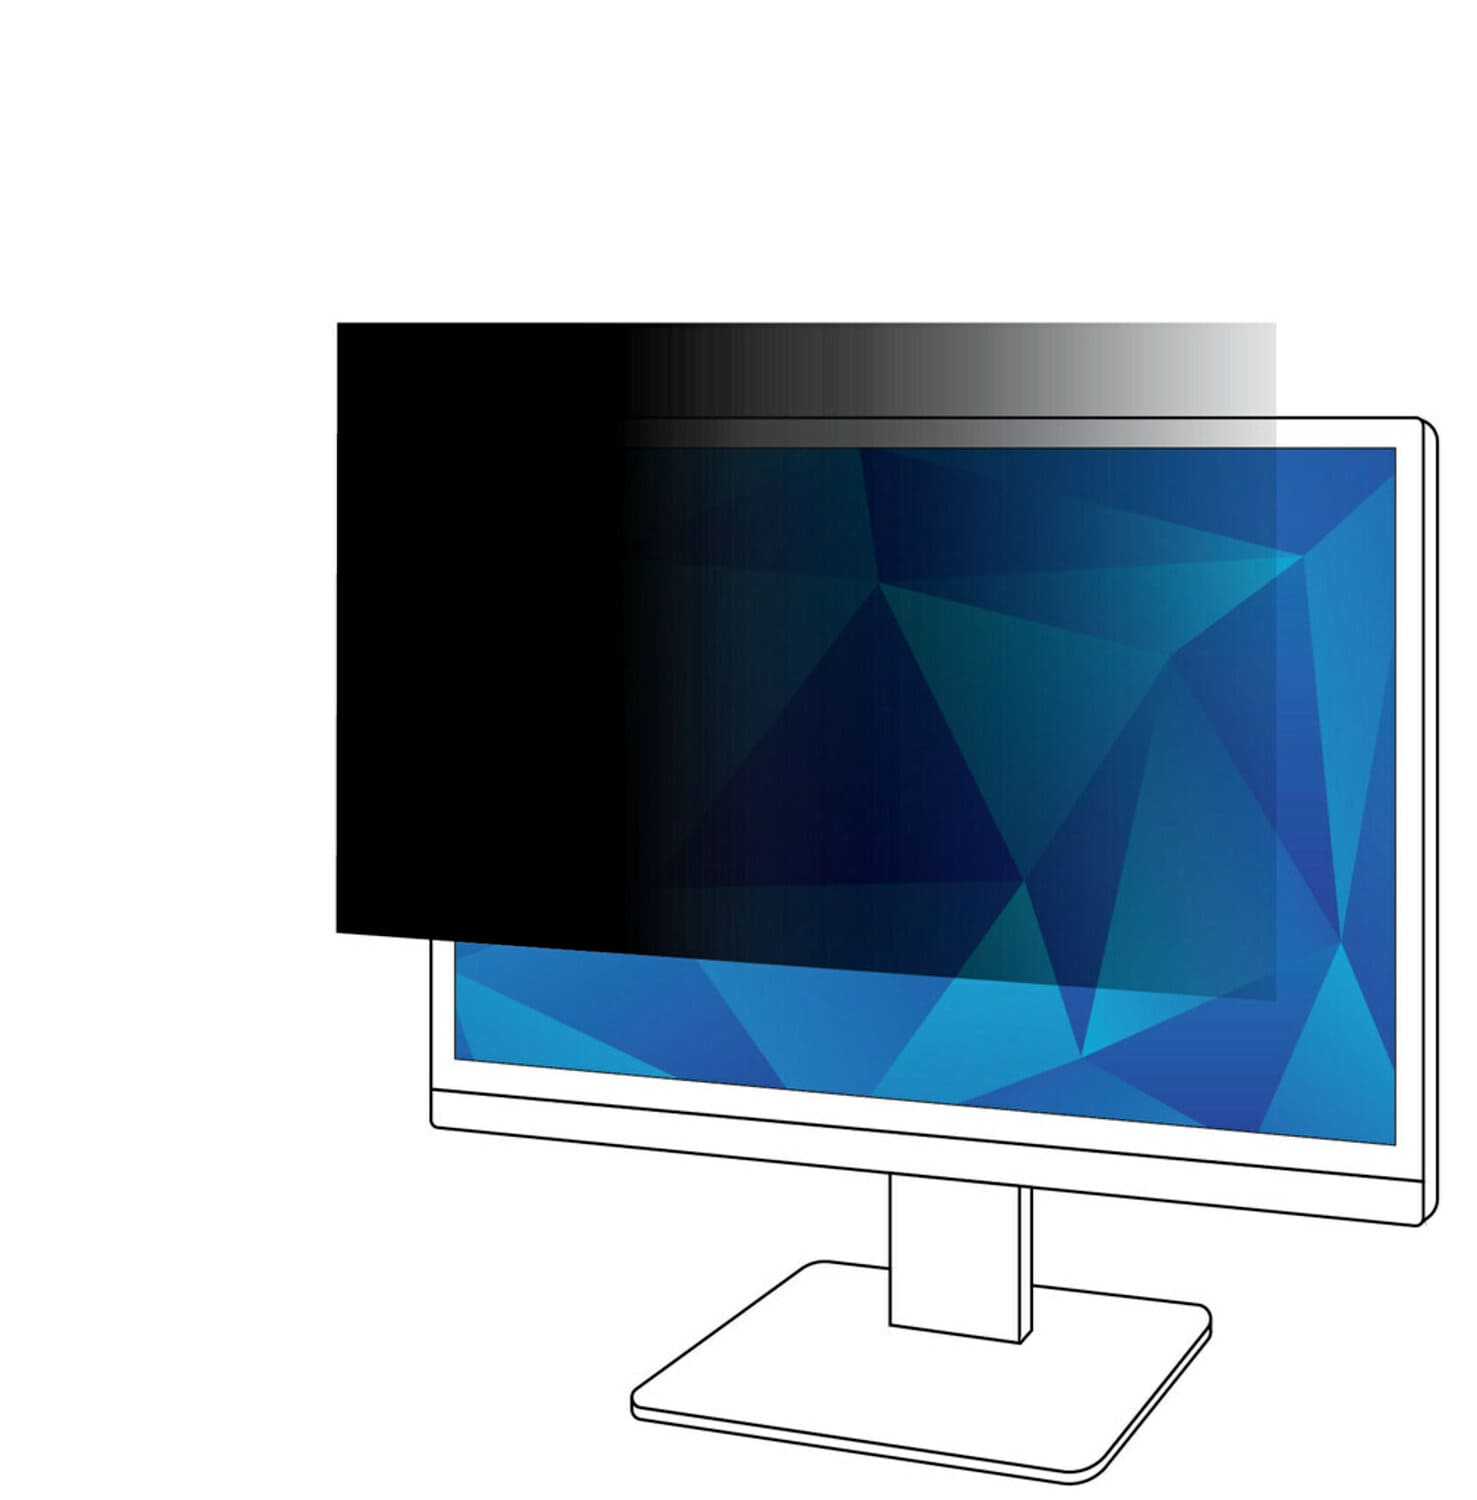 7000021449 - 3M Privacy Filter for 20in Monitor, 16:9, PF200W9B